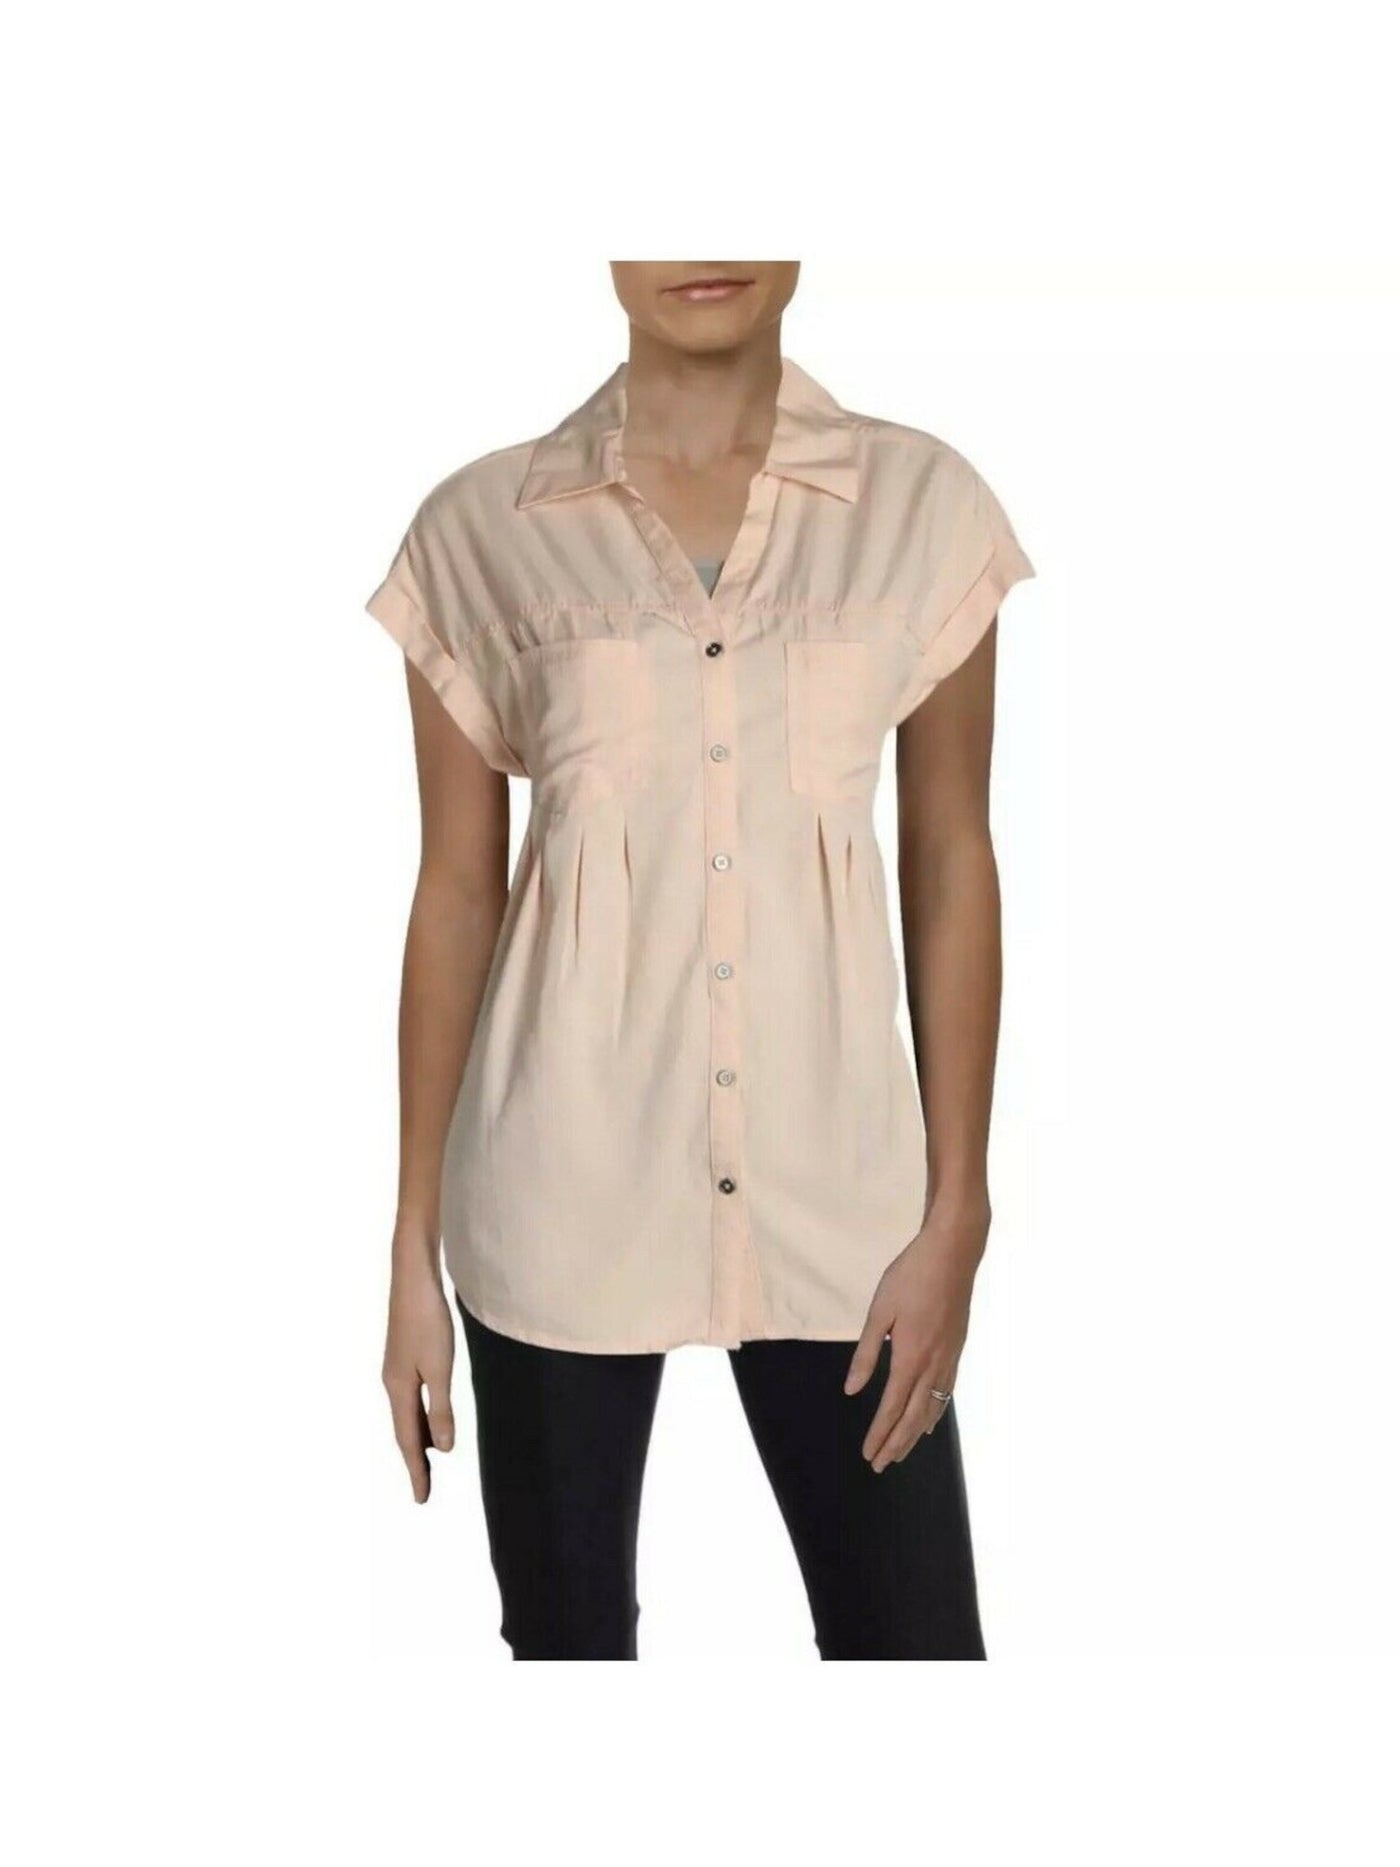 STYLE & COMPANY Womens Collared Short Sleeve Henley Wear To Work Button Up Top